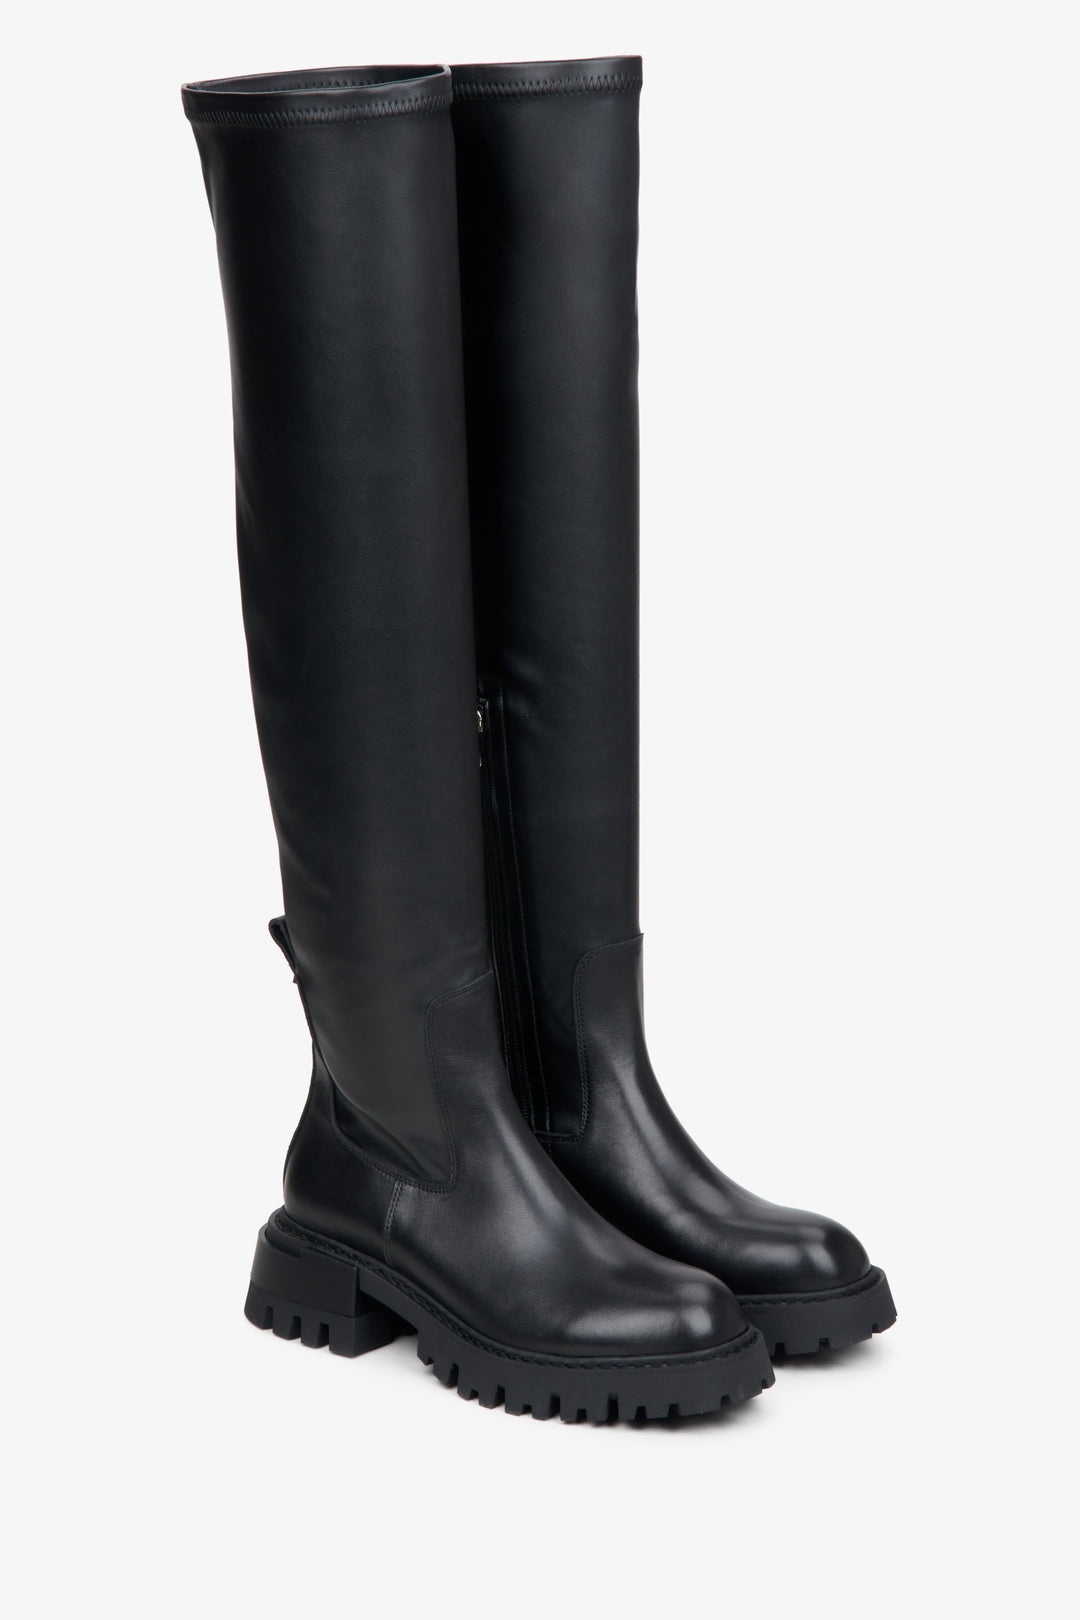 Women's black high-knee boots made of leather with elastic shaft by Estro.